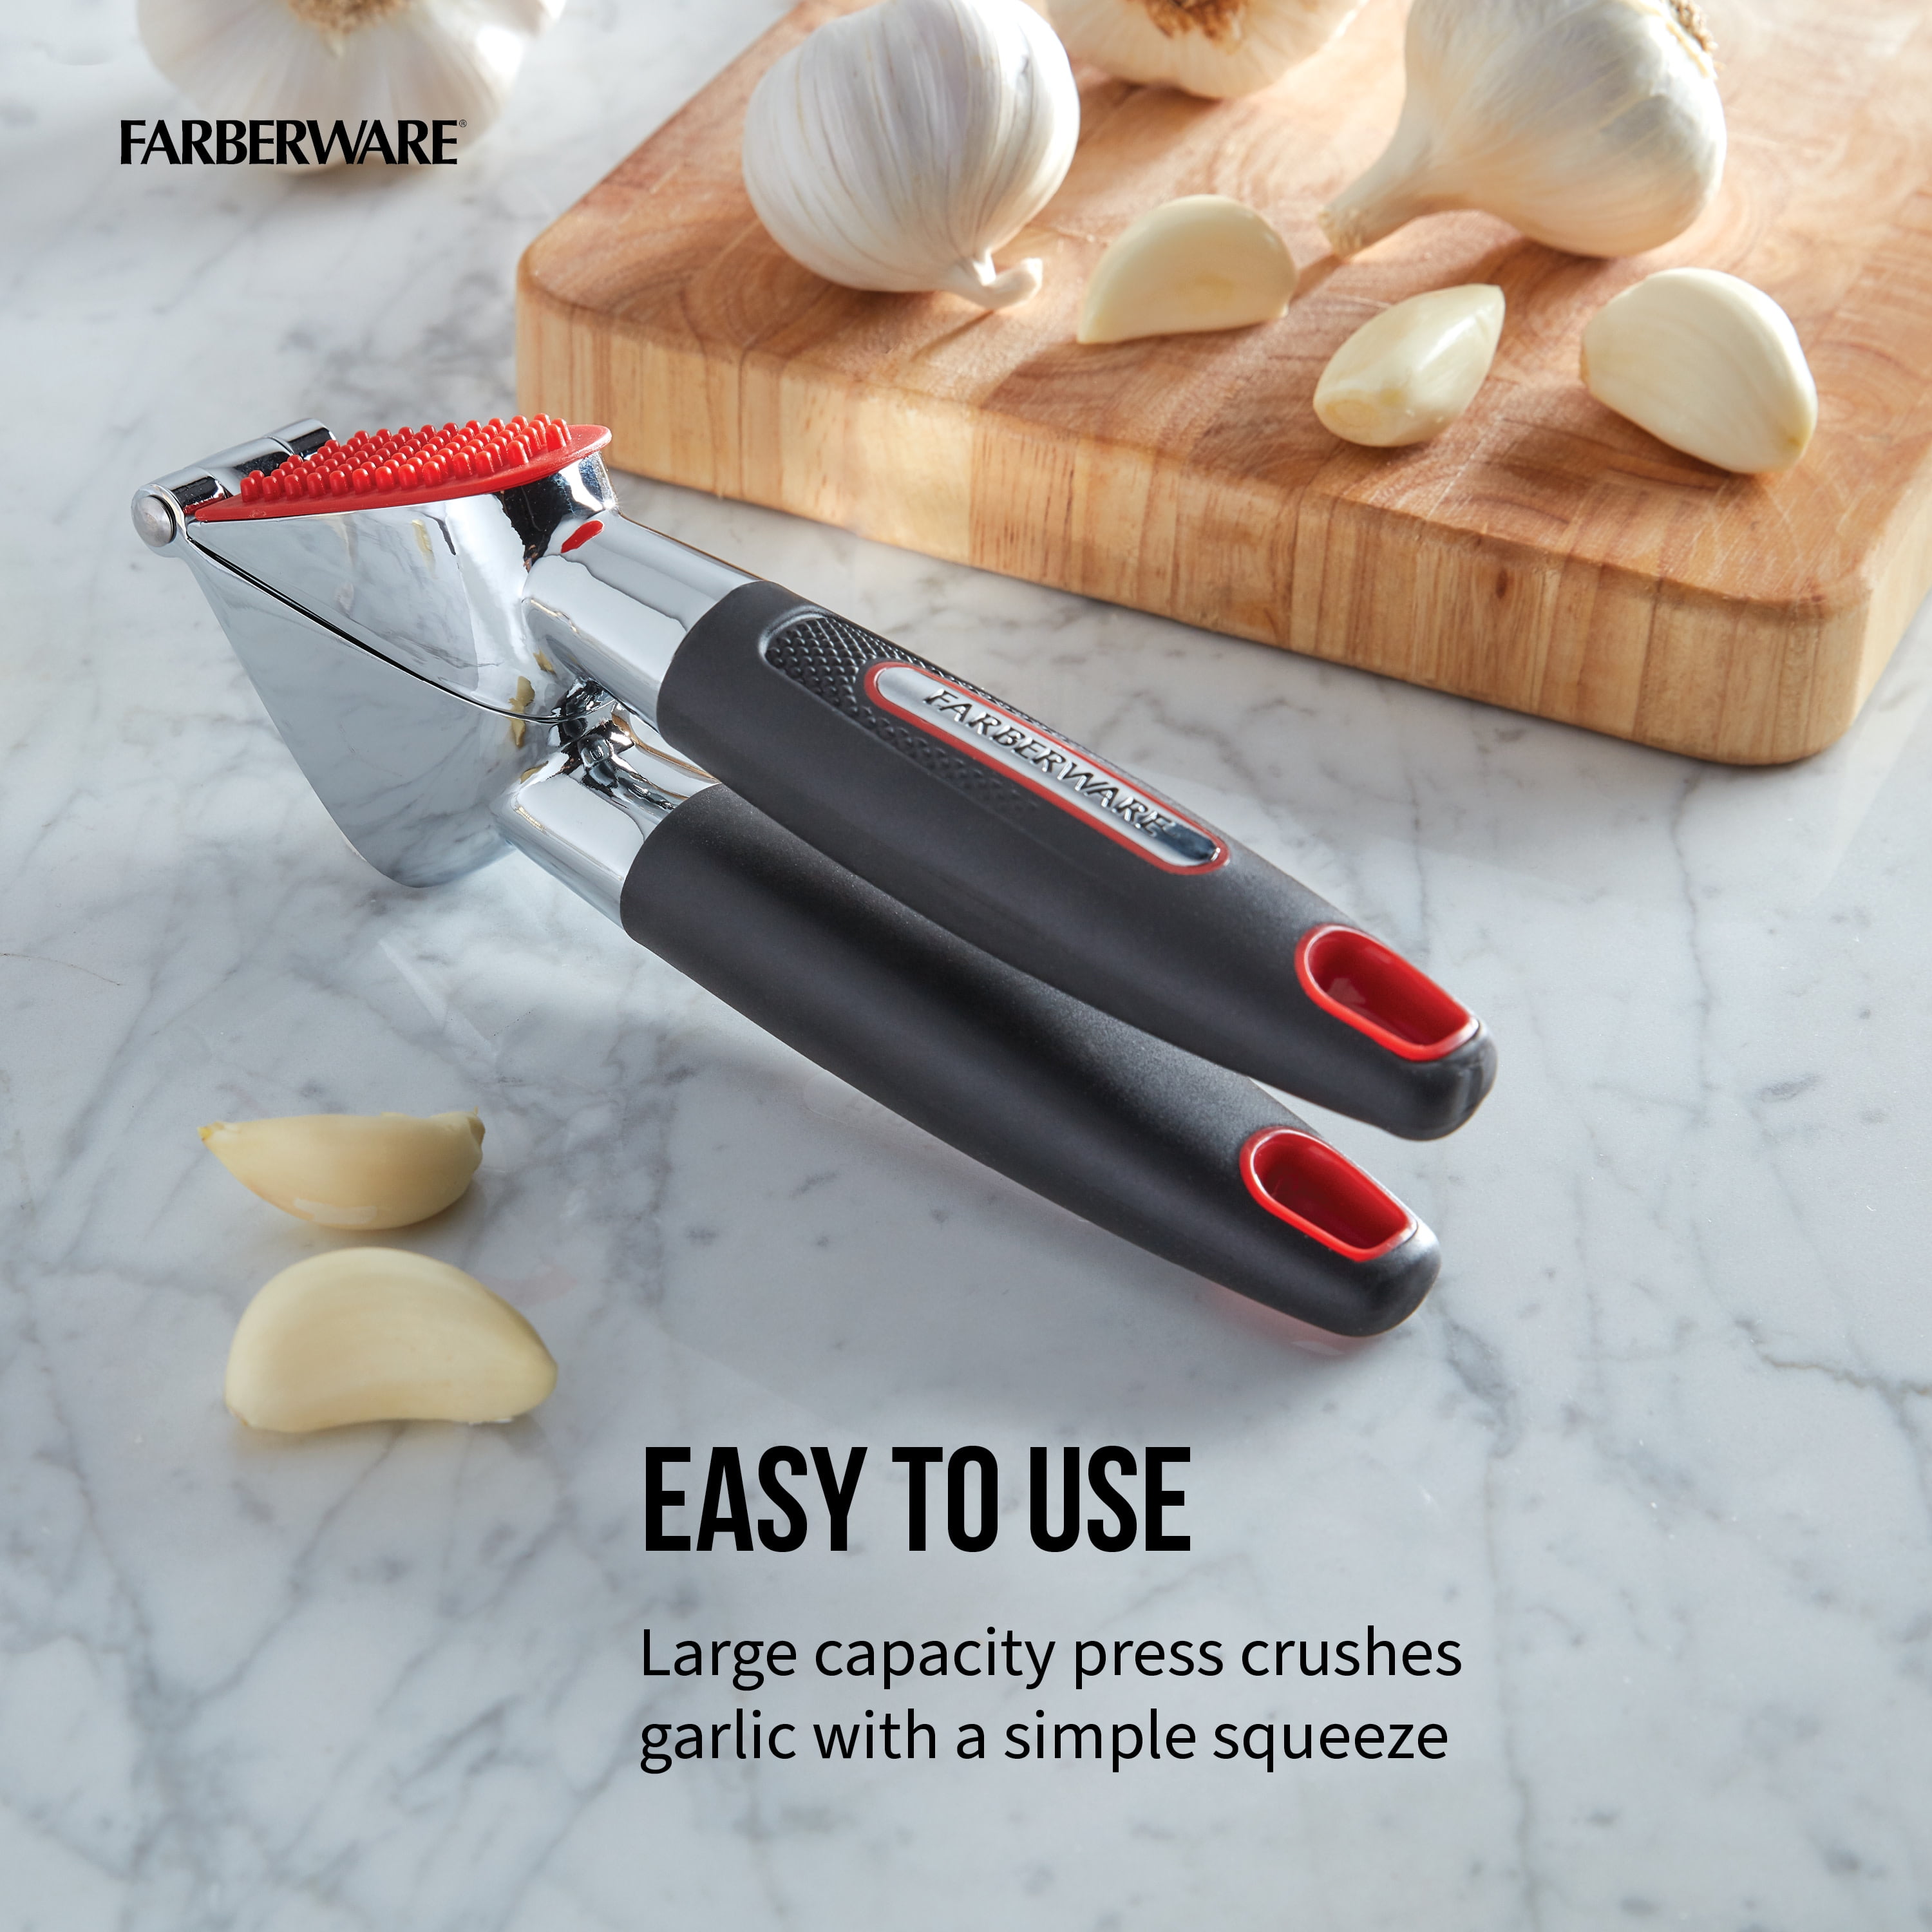 Farberware Soft Grips 0.86 lb Stainless Steel Garlic Press with Black  Handle and Red Accent